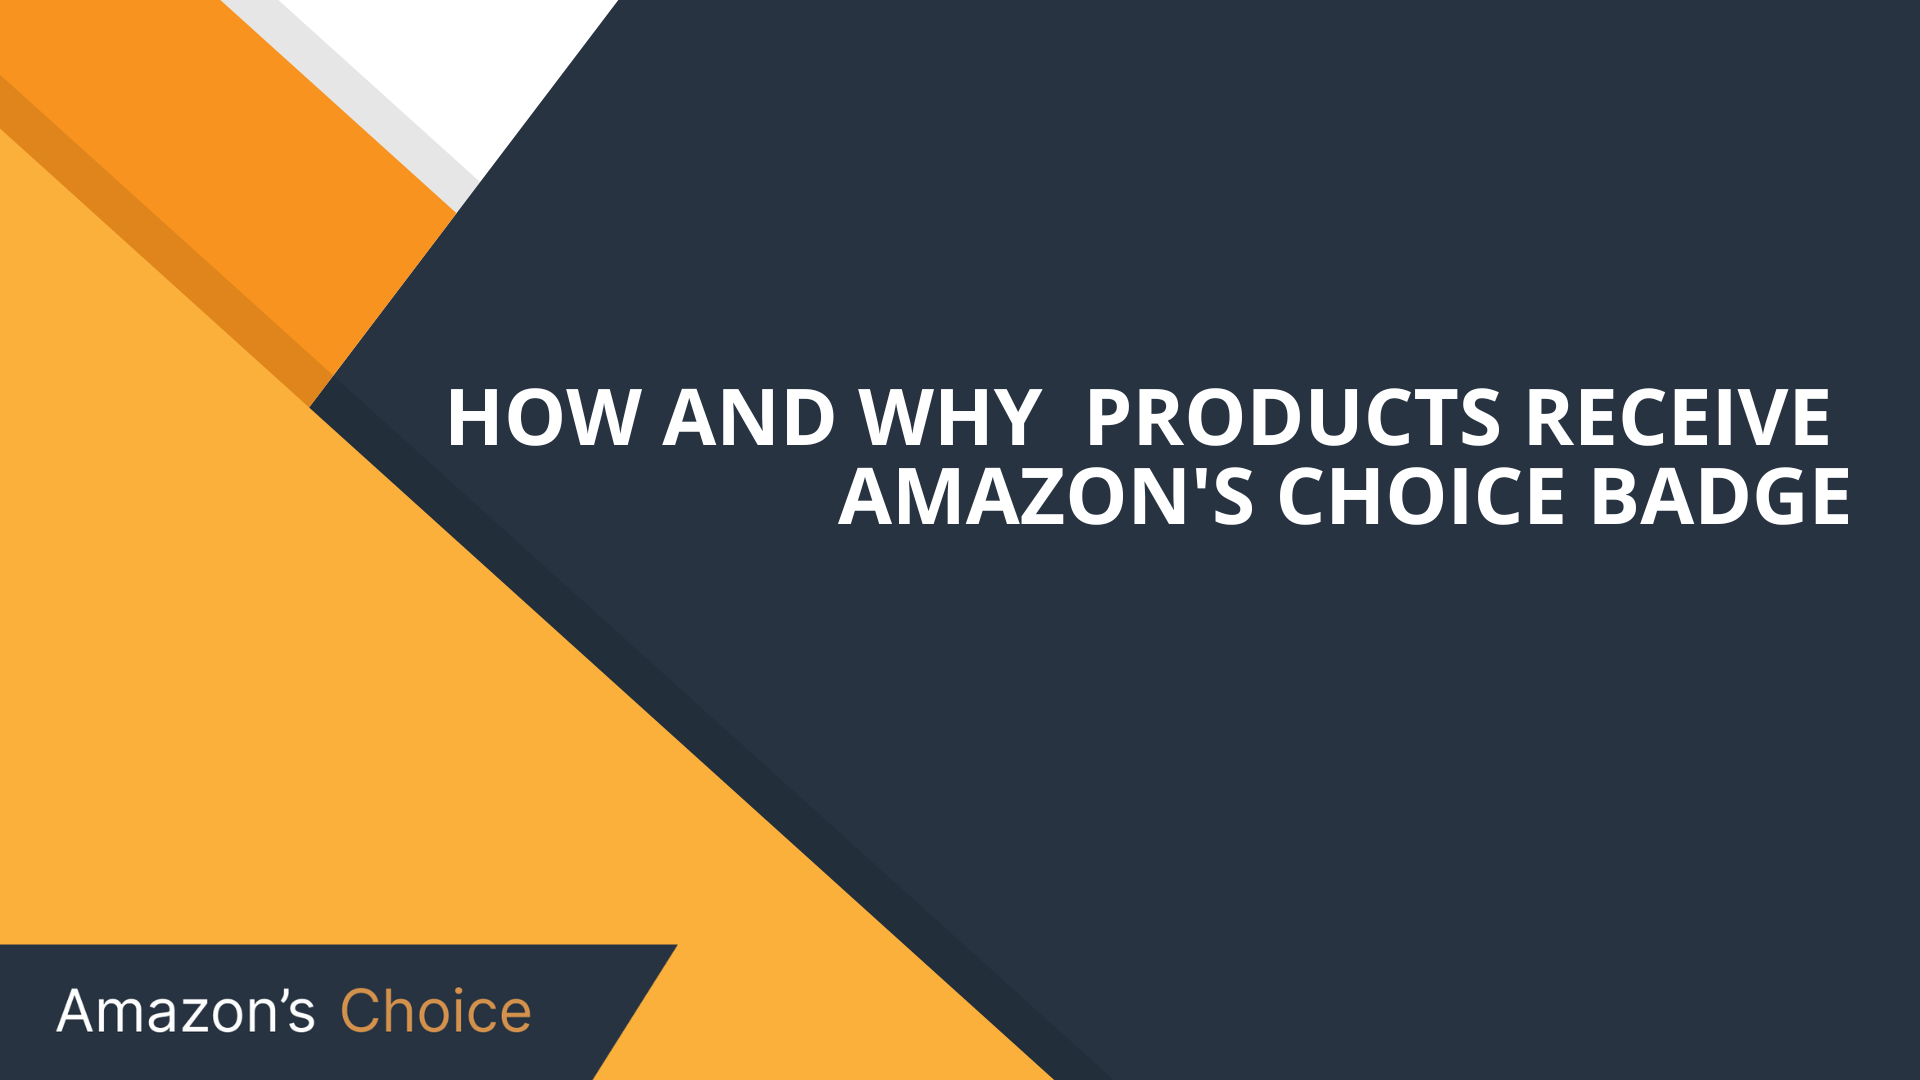 Amazon’s Choice: How and Why Products Receive This Badge